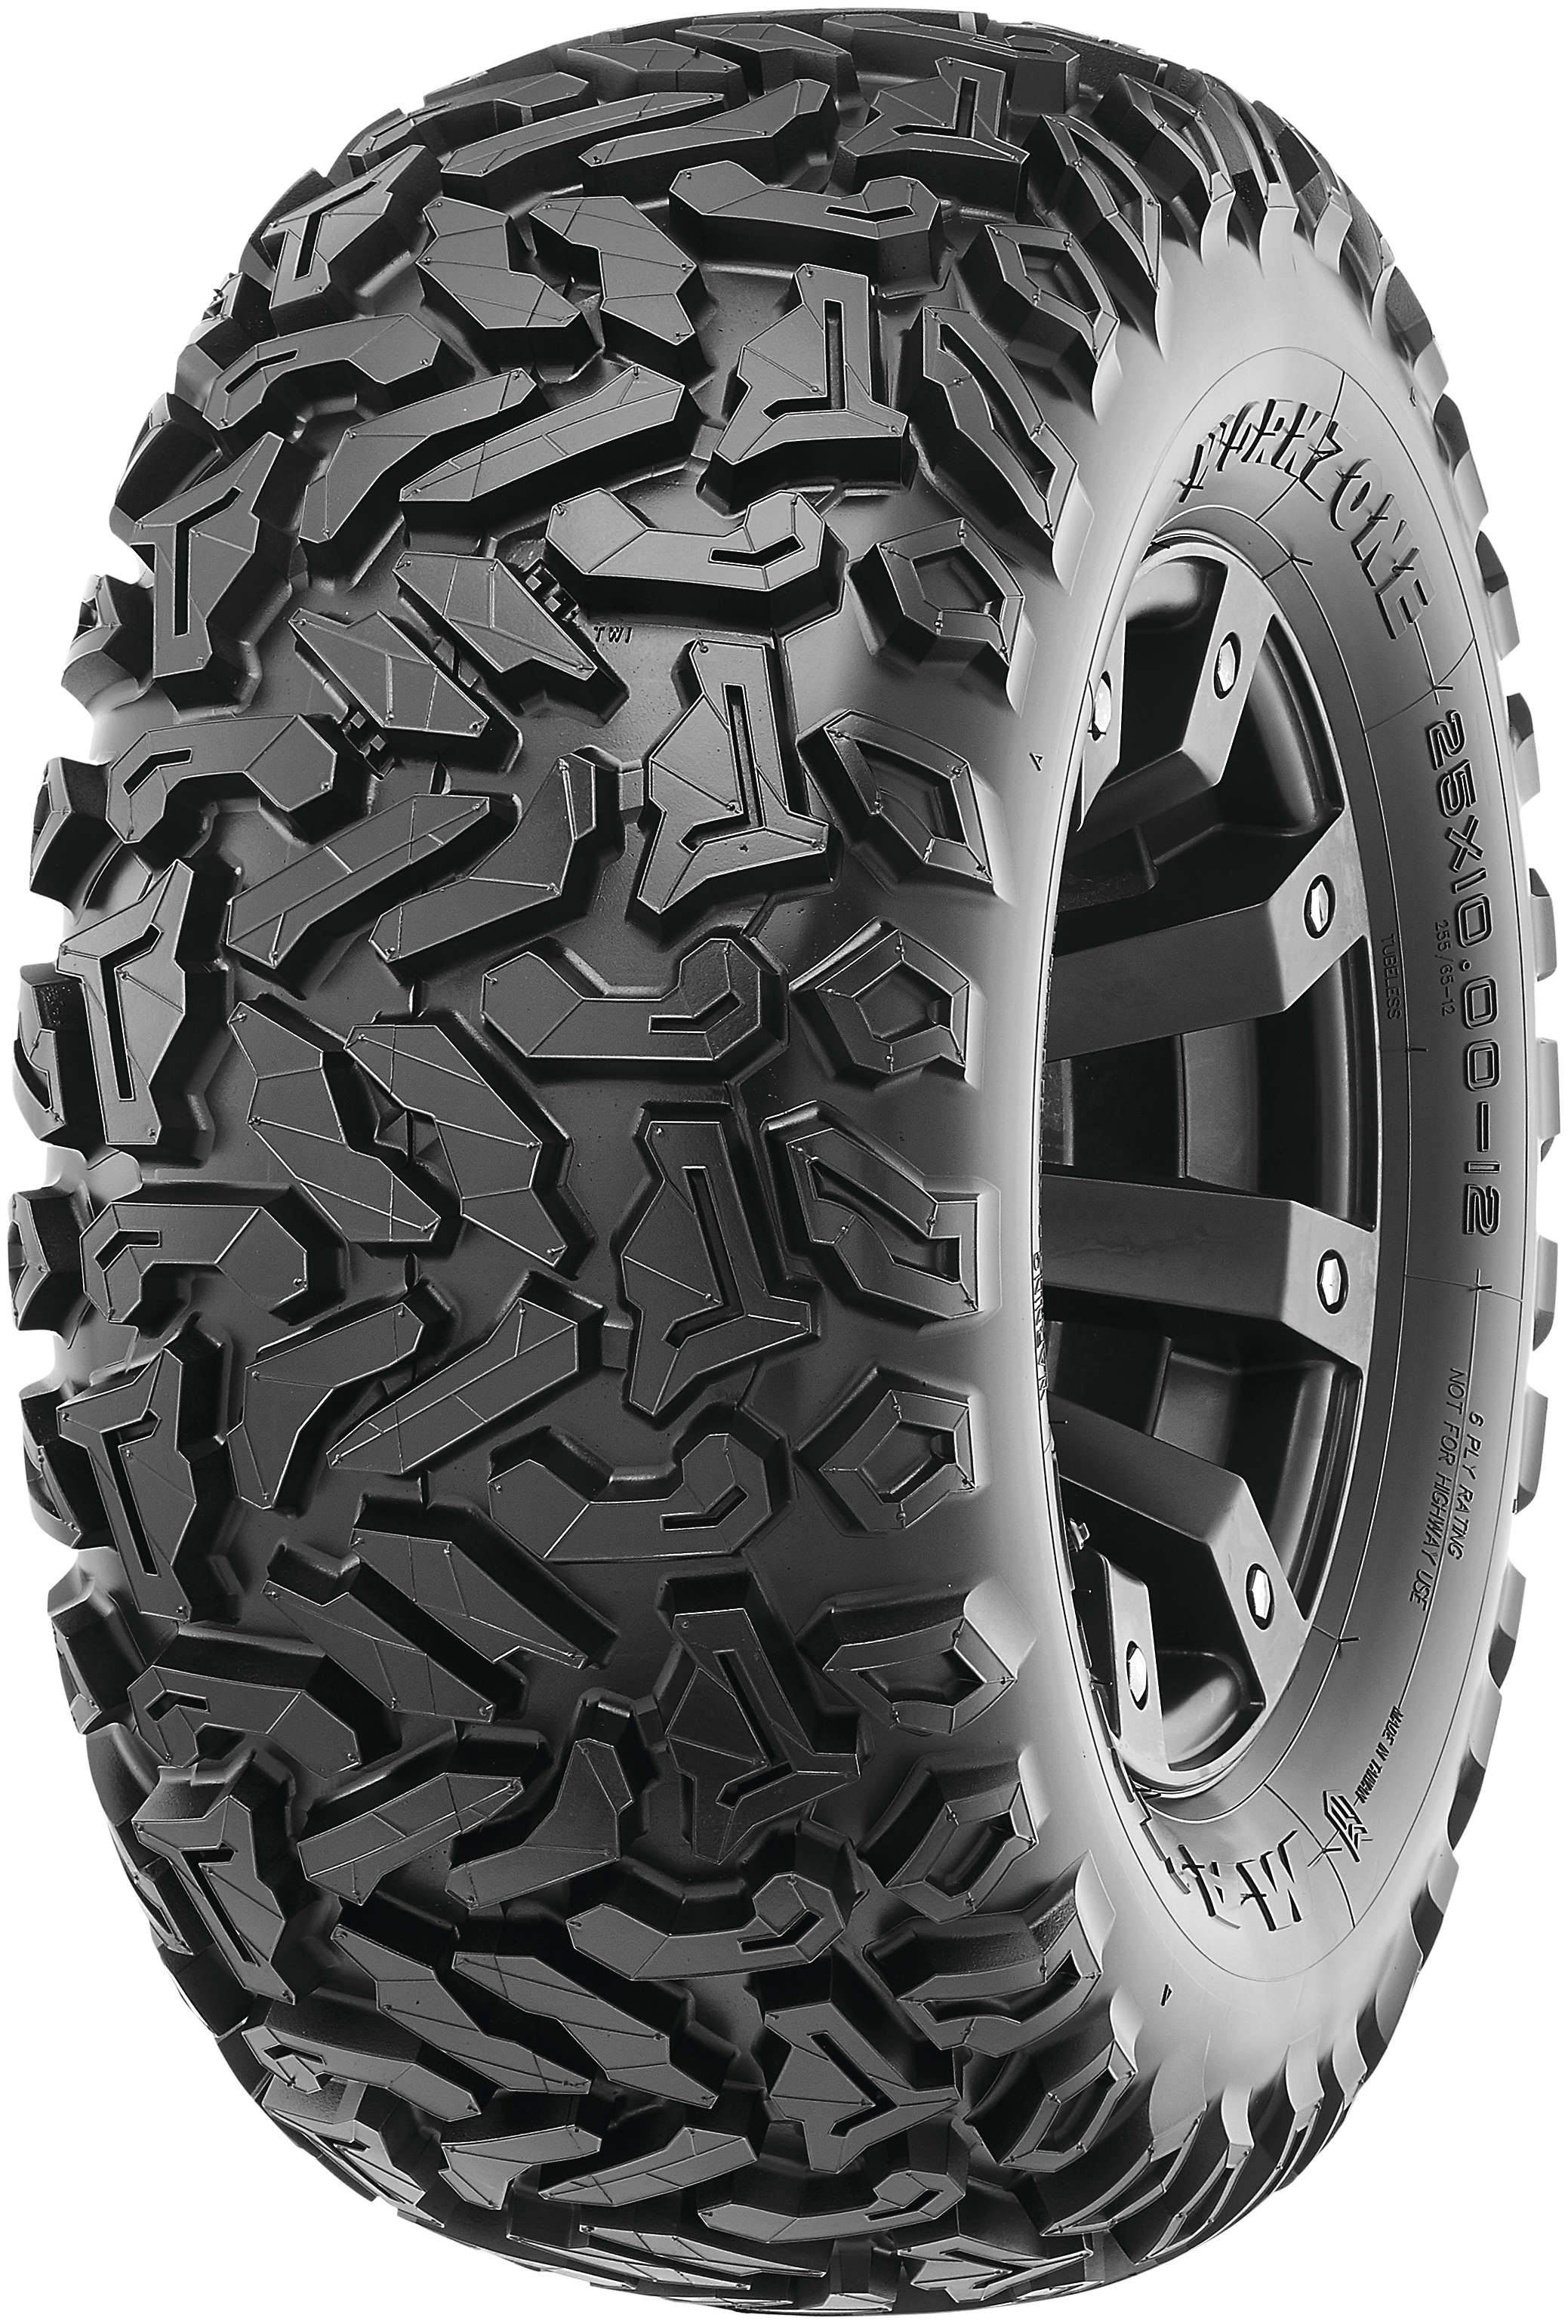 Workzone M102 25x10R-12 Tire - Front or Rear, 6 Ply - Click Image to Close